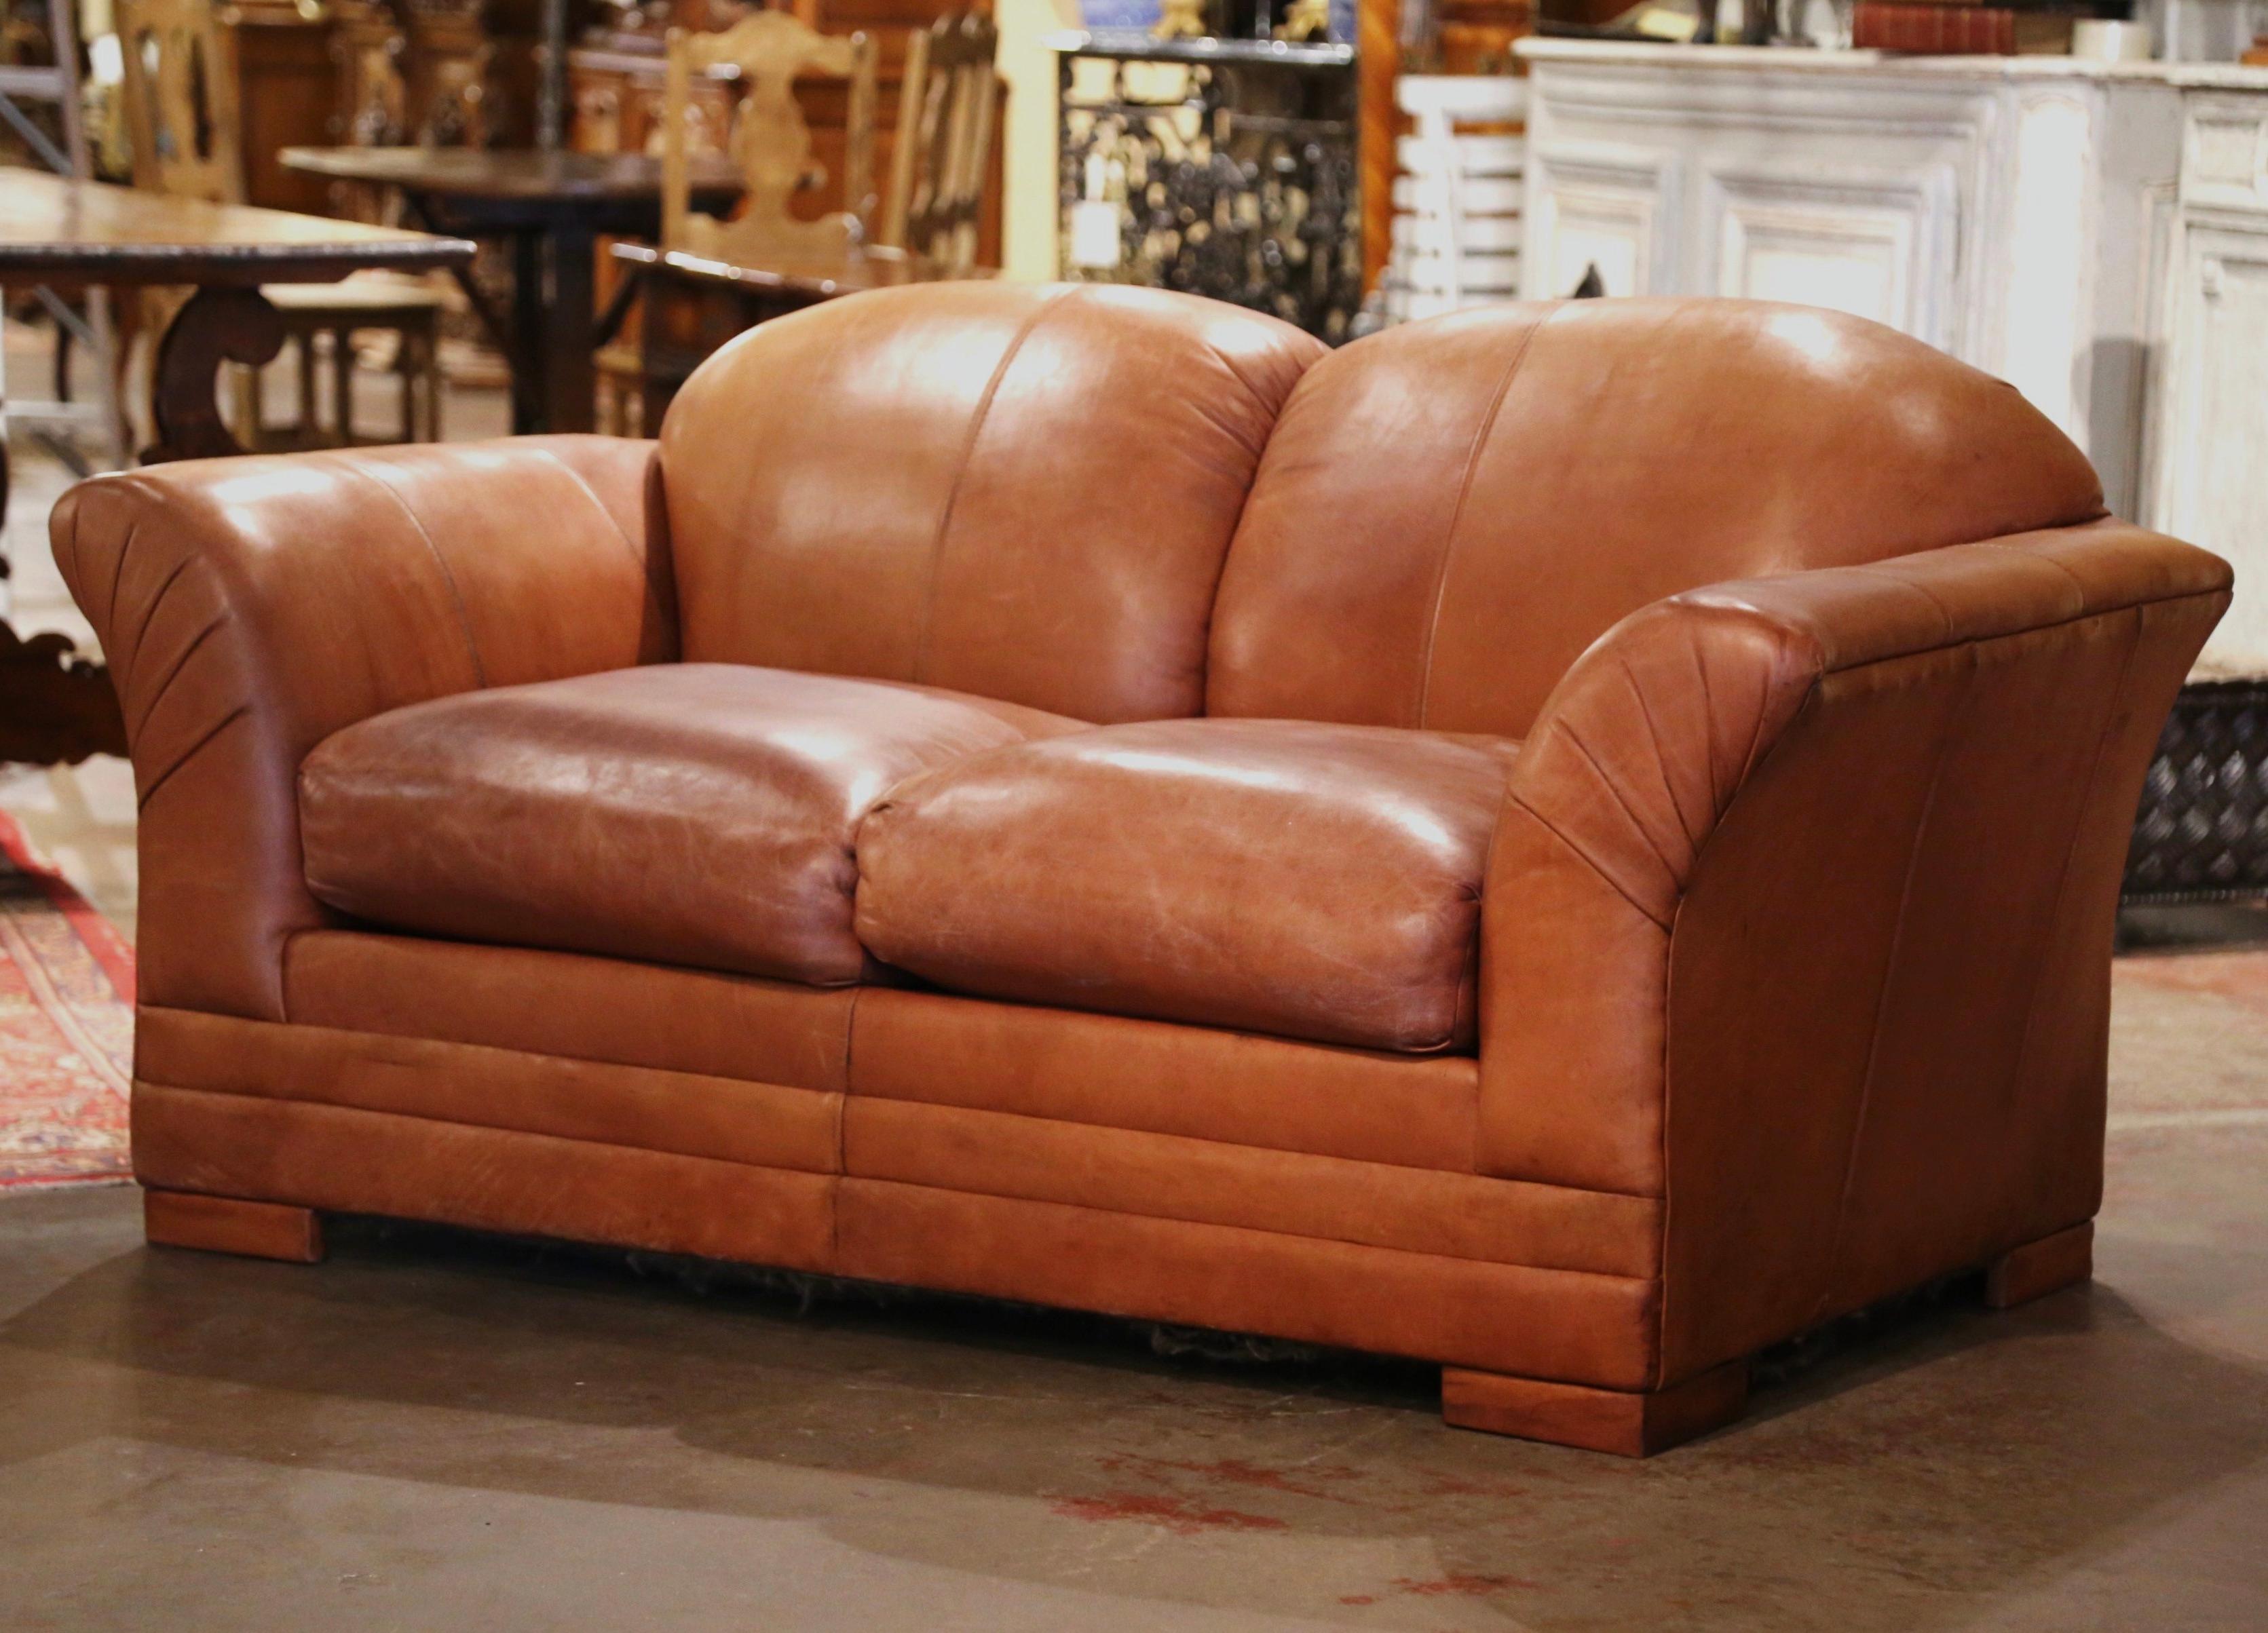 This Classic, antique Art Deco club sofa was crafted in France, circa 1950. This stately couch features wide, rounded armrests, a pitch back with an arched top shape, and square feet covered with leather at the base. The Classic, masculine French